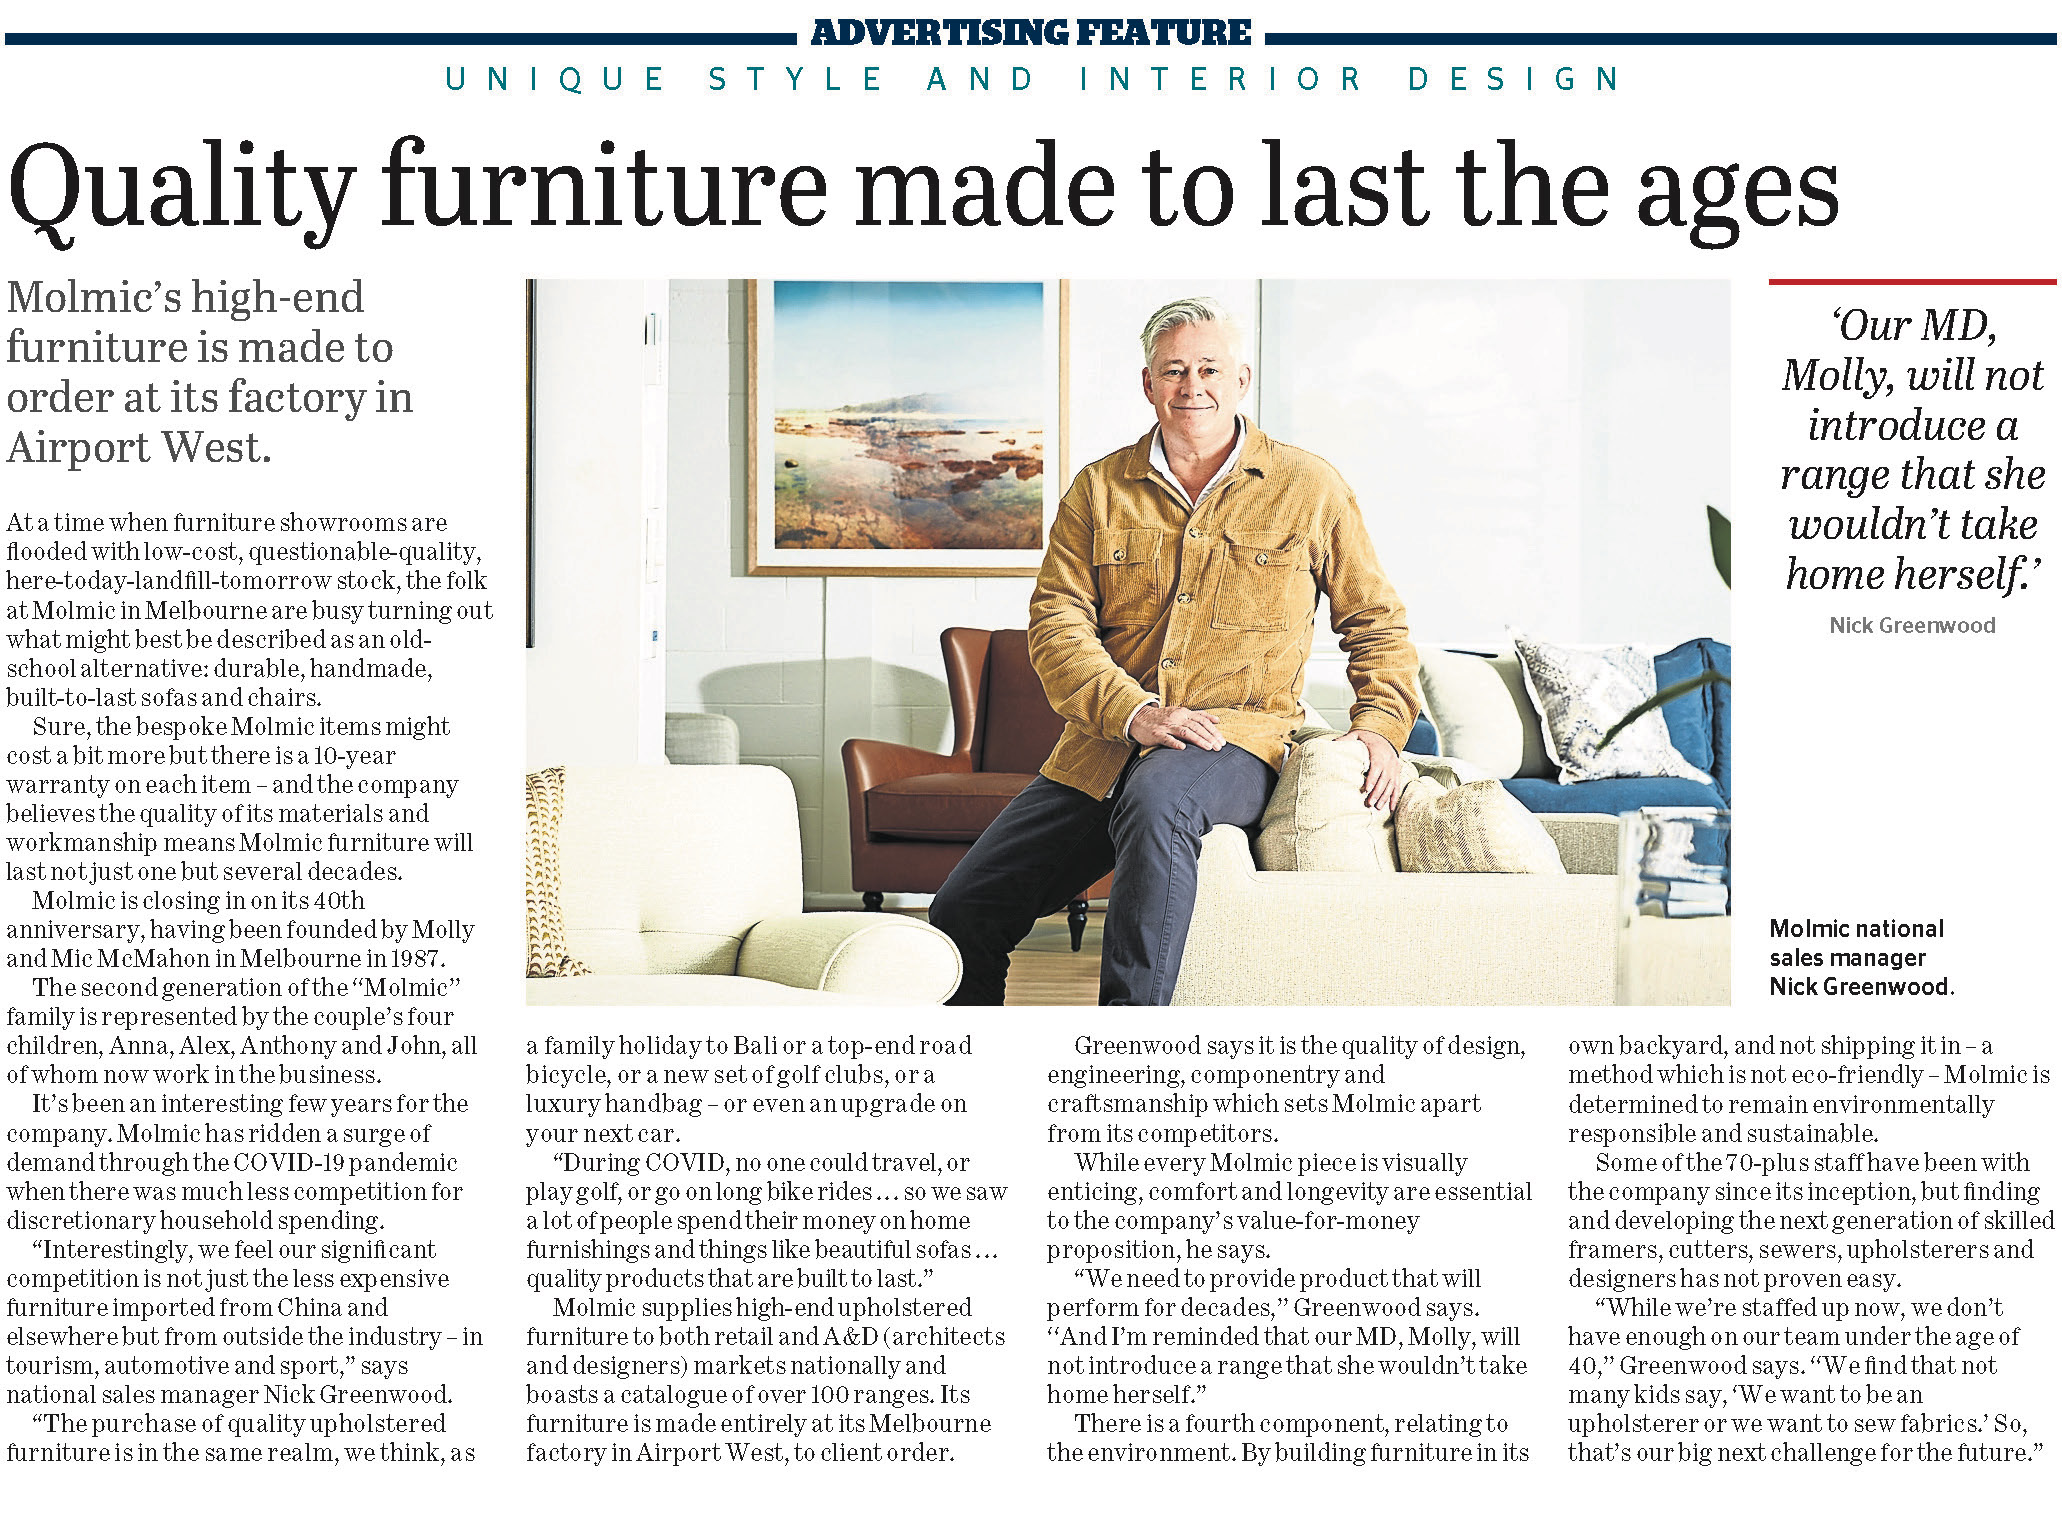 Molmic featured in the Age Newspaper